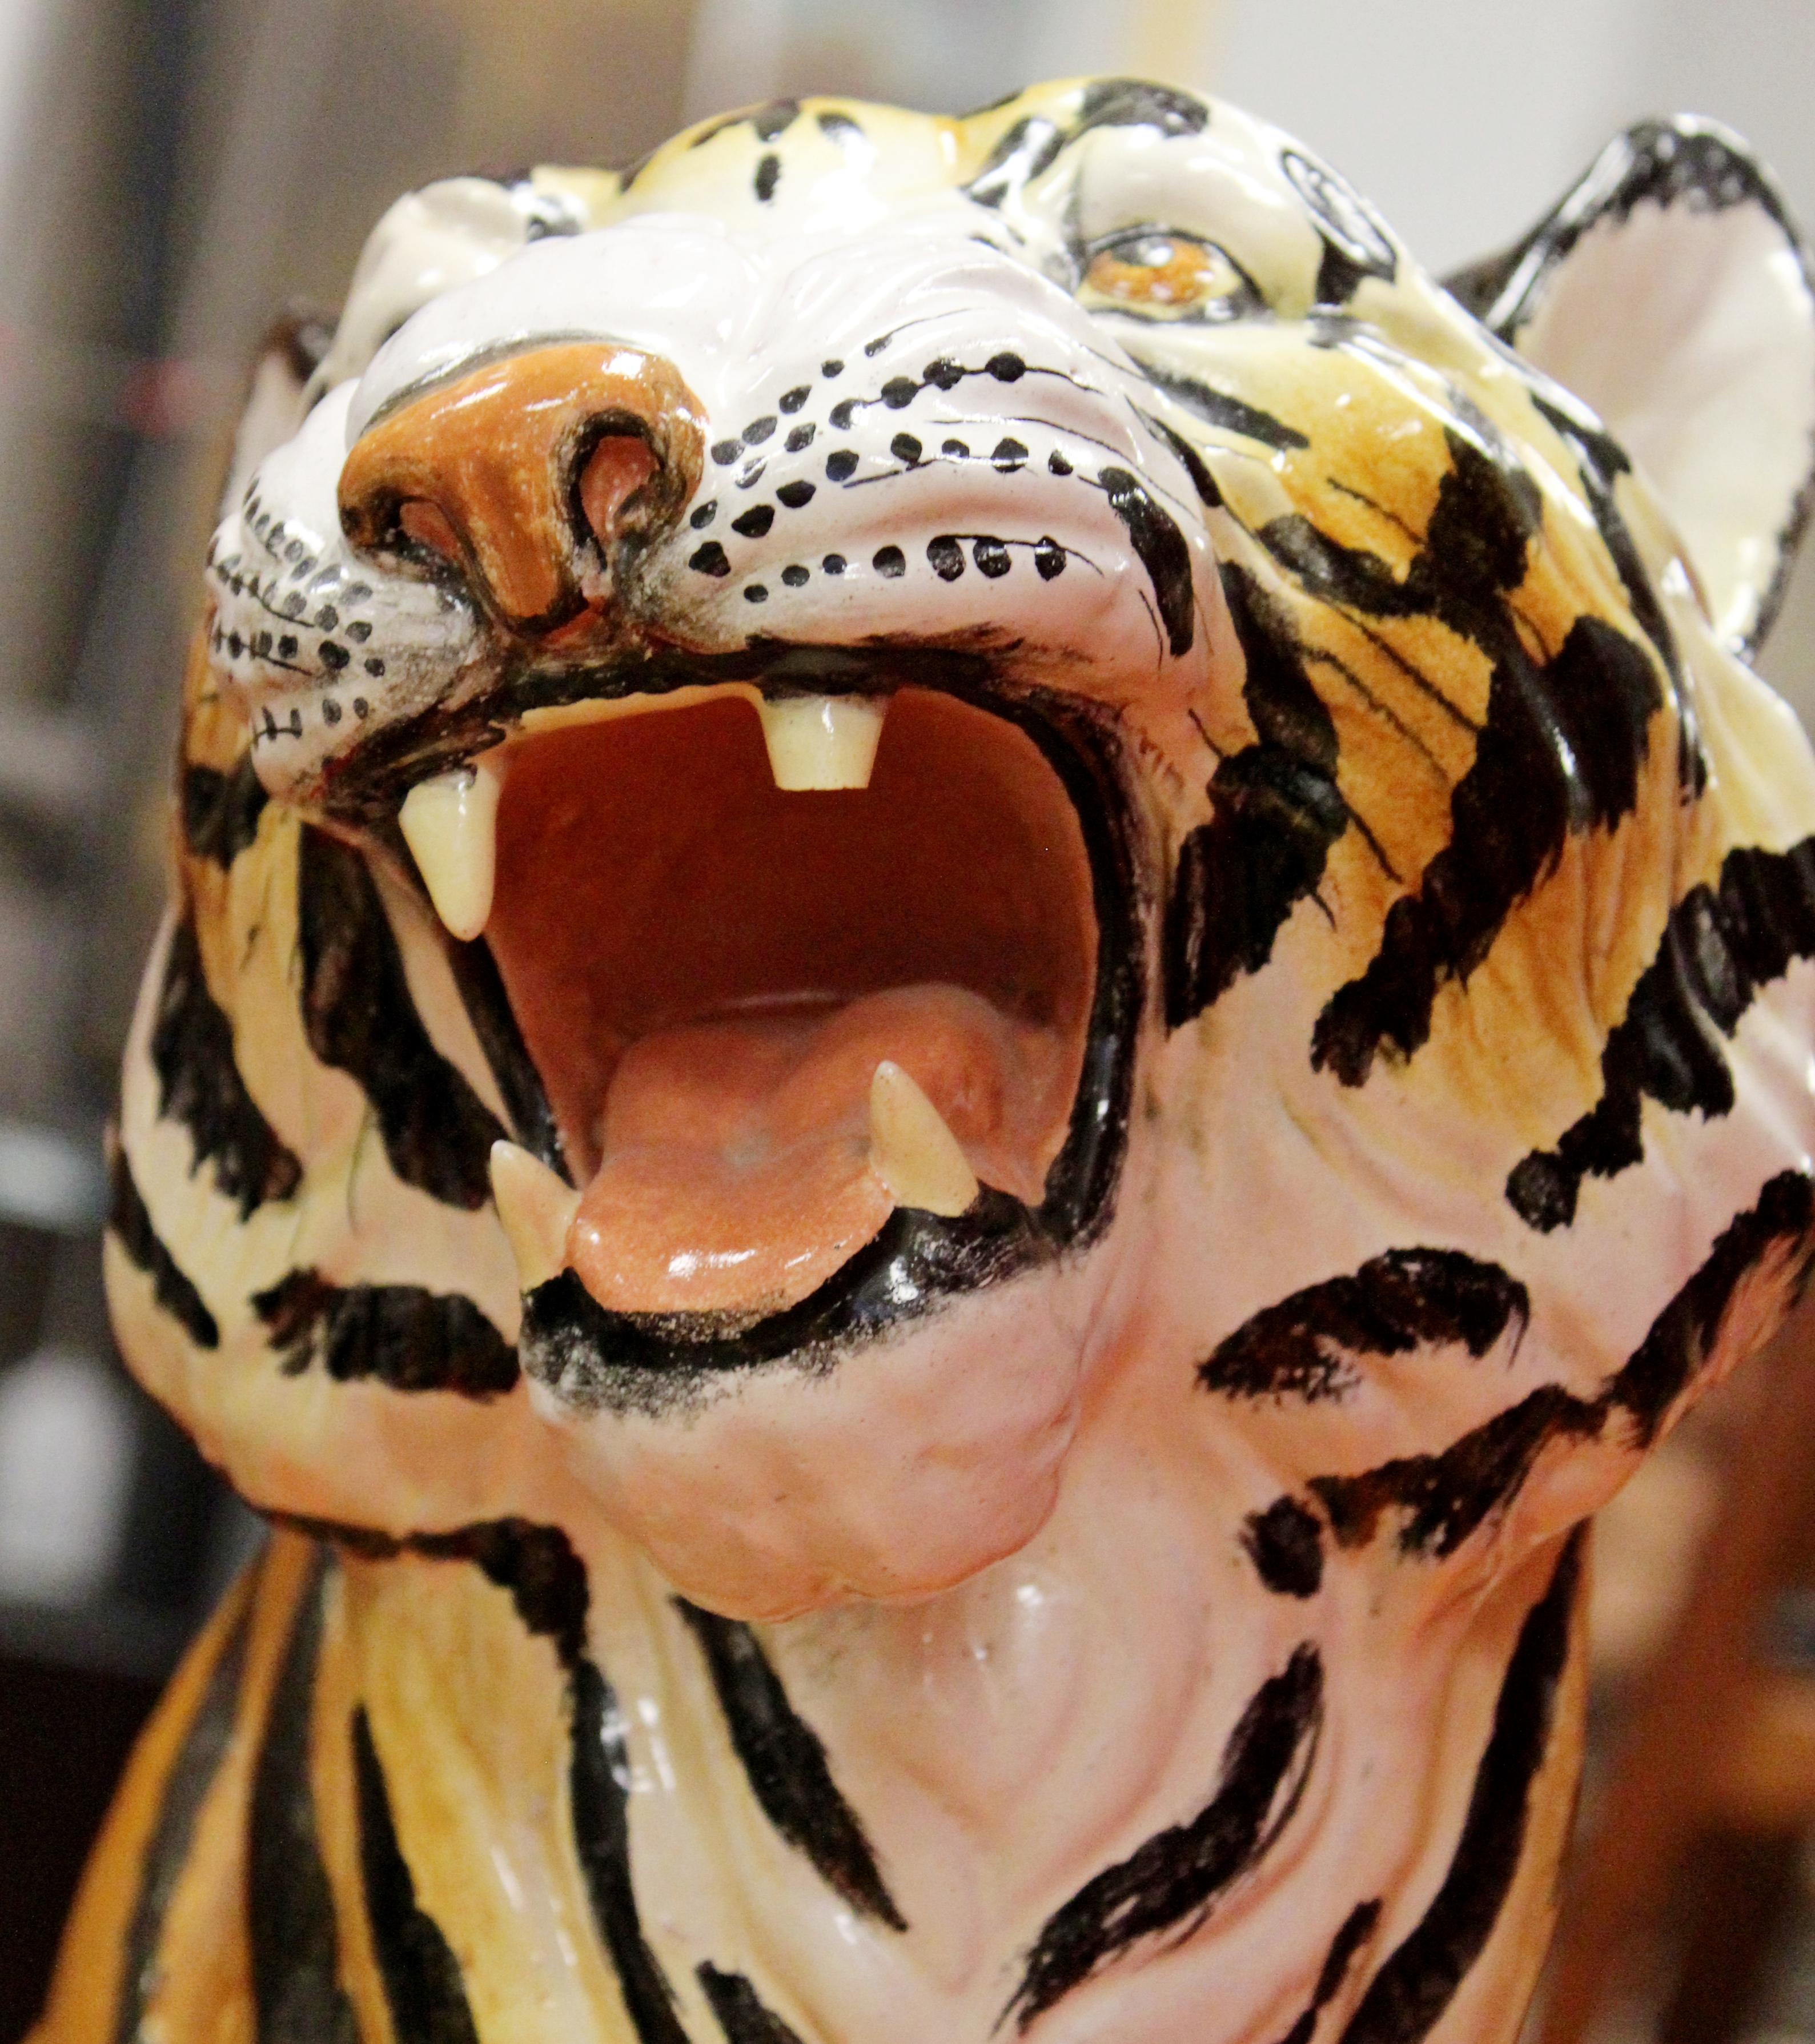 Late 20th Century Mid-Century Modern Large Porcelain Roaring Tiger Floor Sculpture Statue, Italy